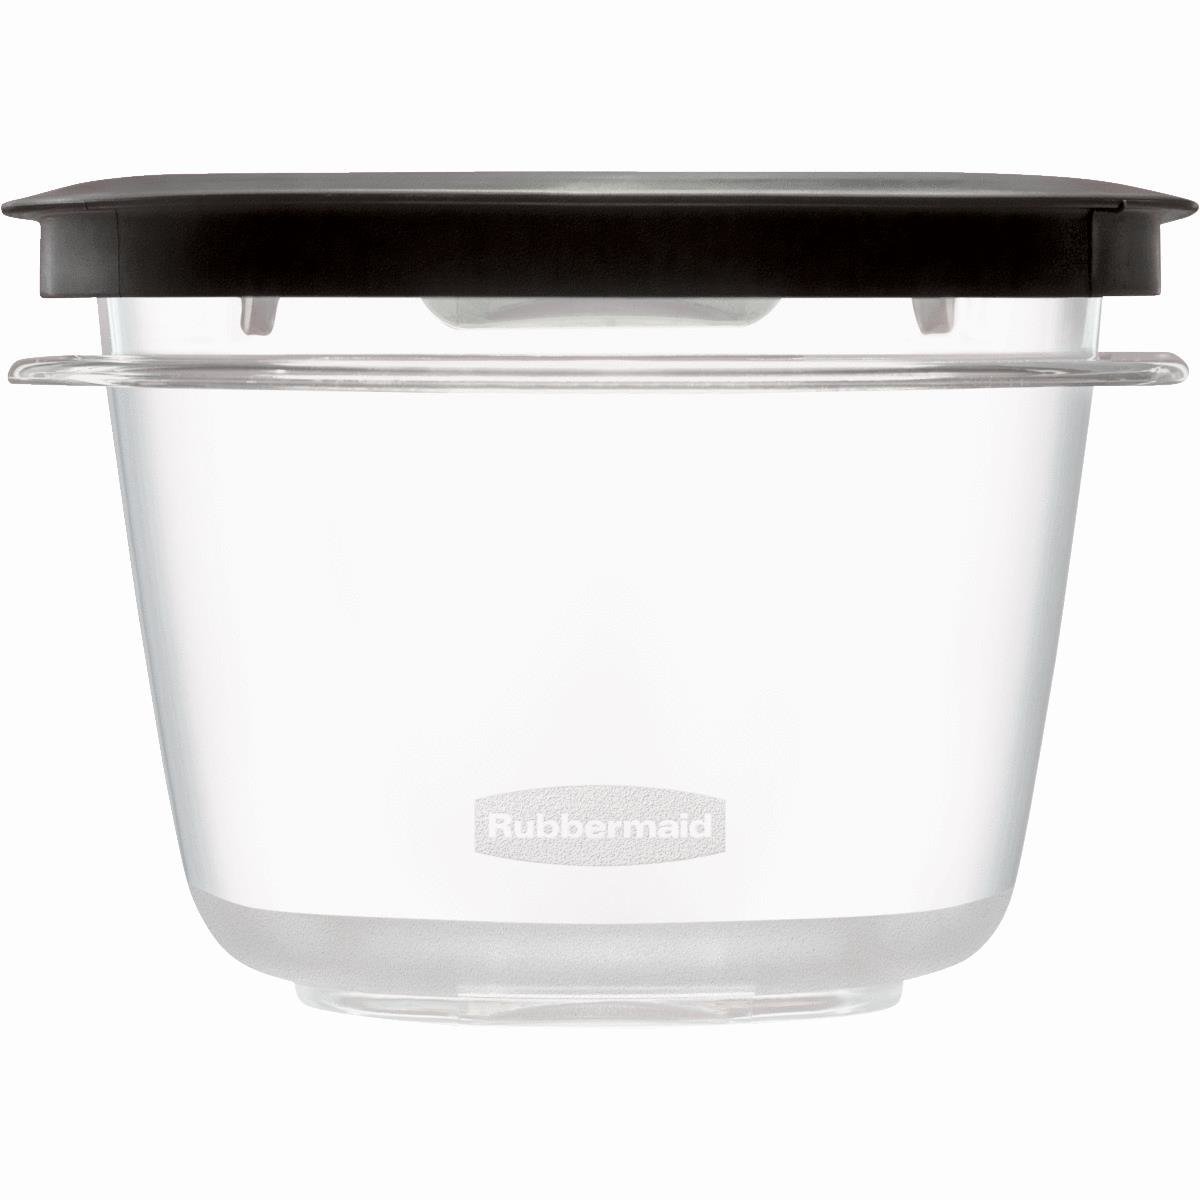 Rubbermaid Food Products 1951293 Premier Round Food Storage Container, 2 Cup